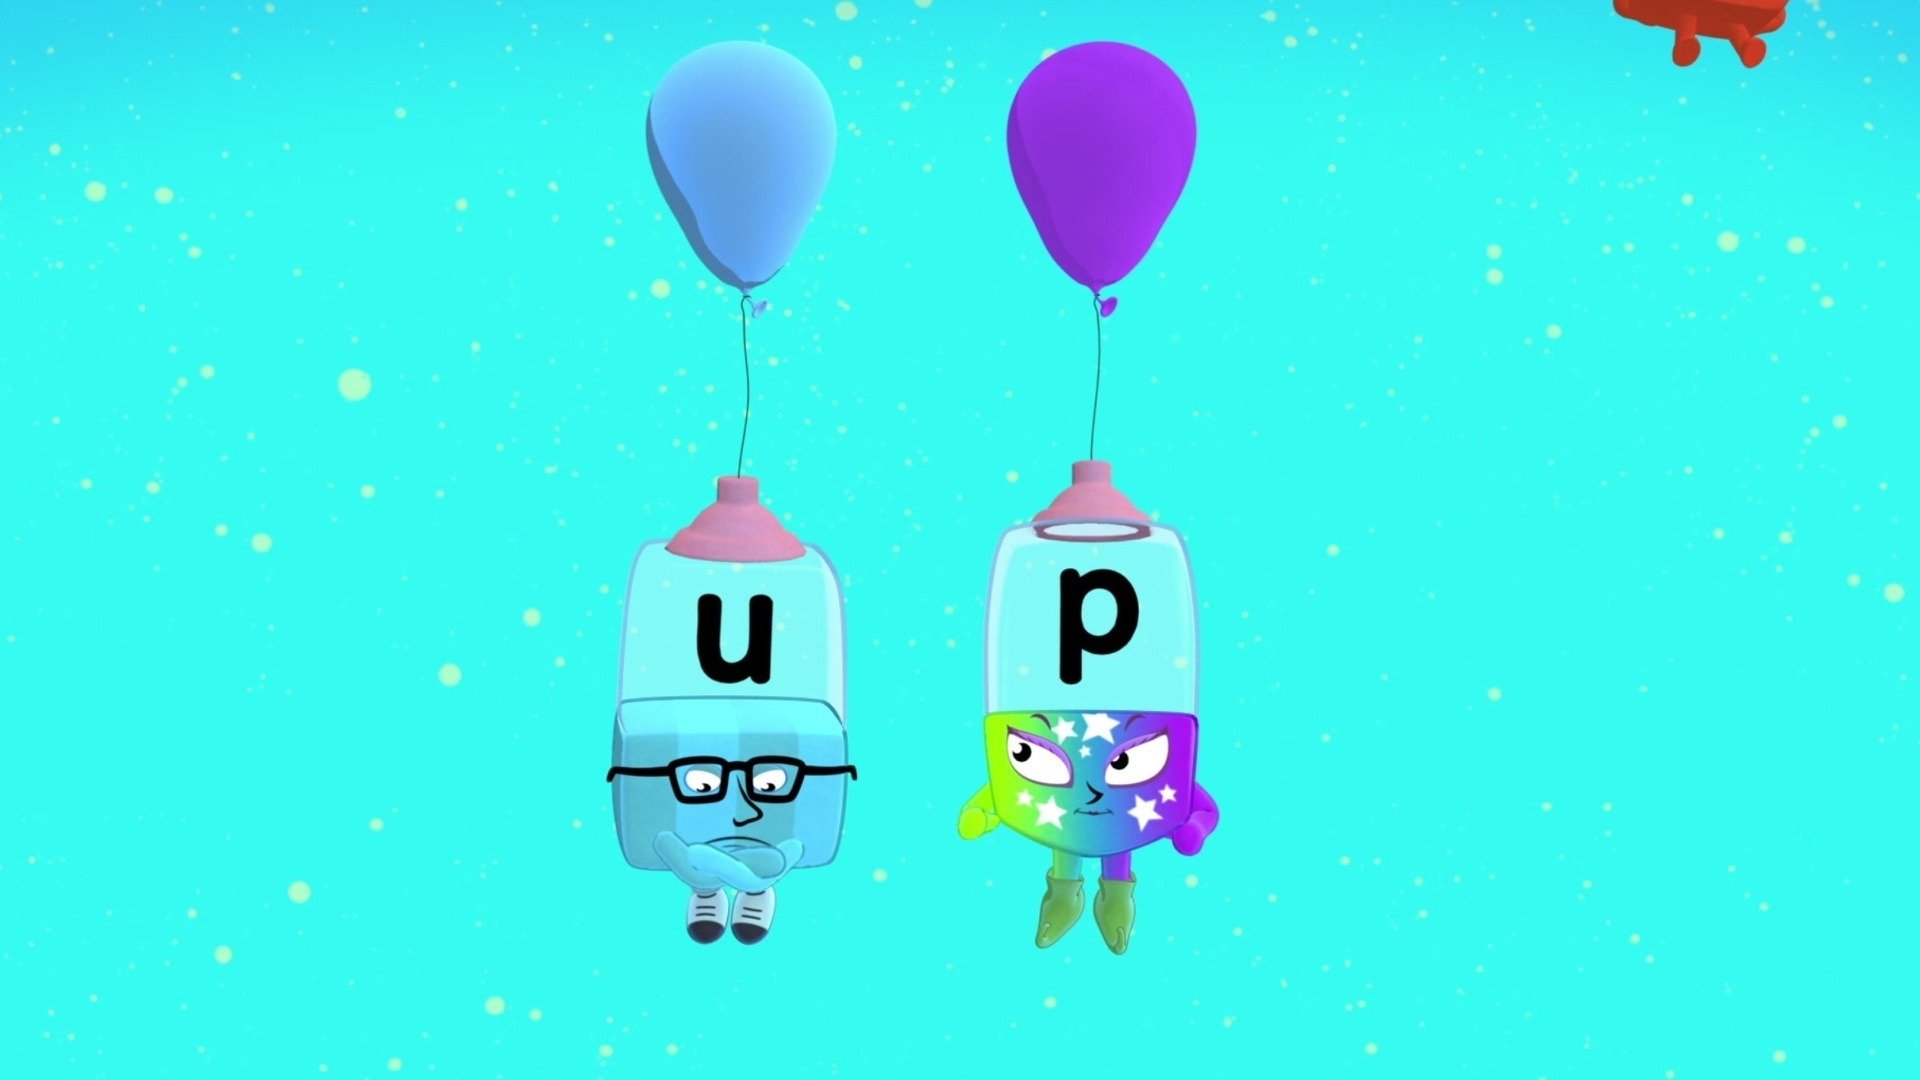 8. Up